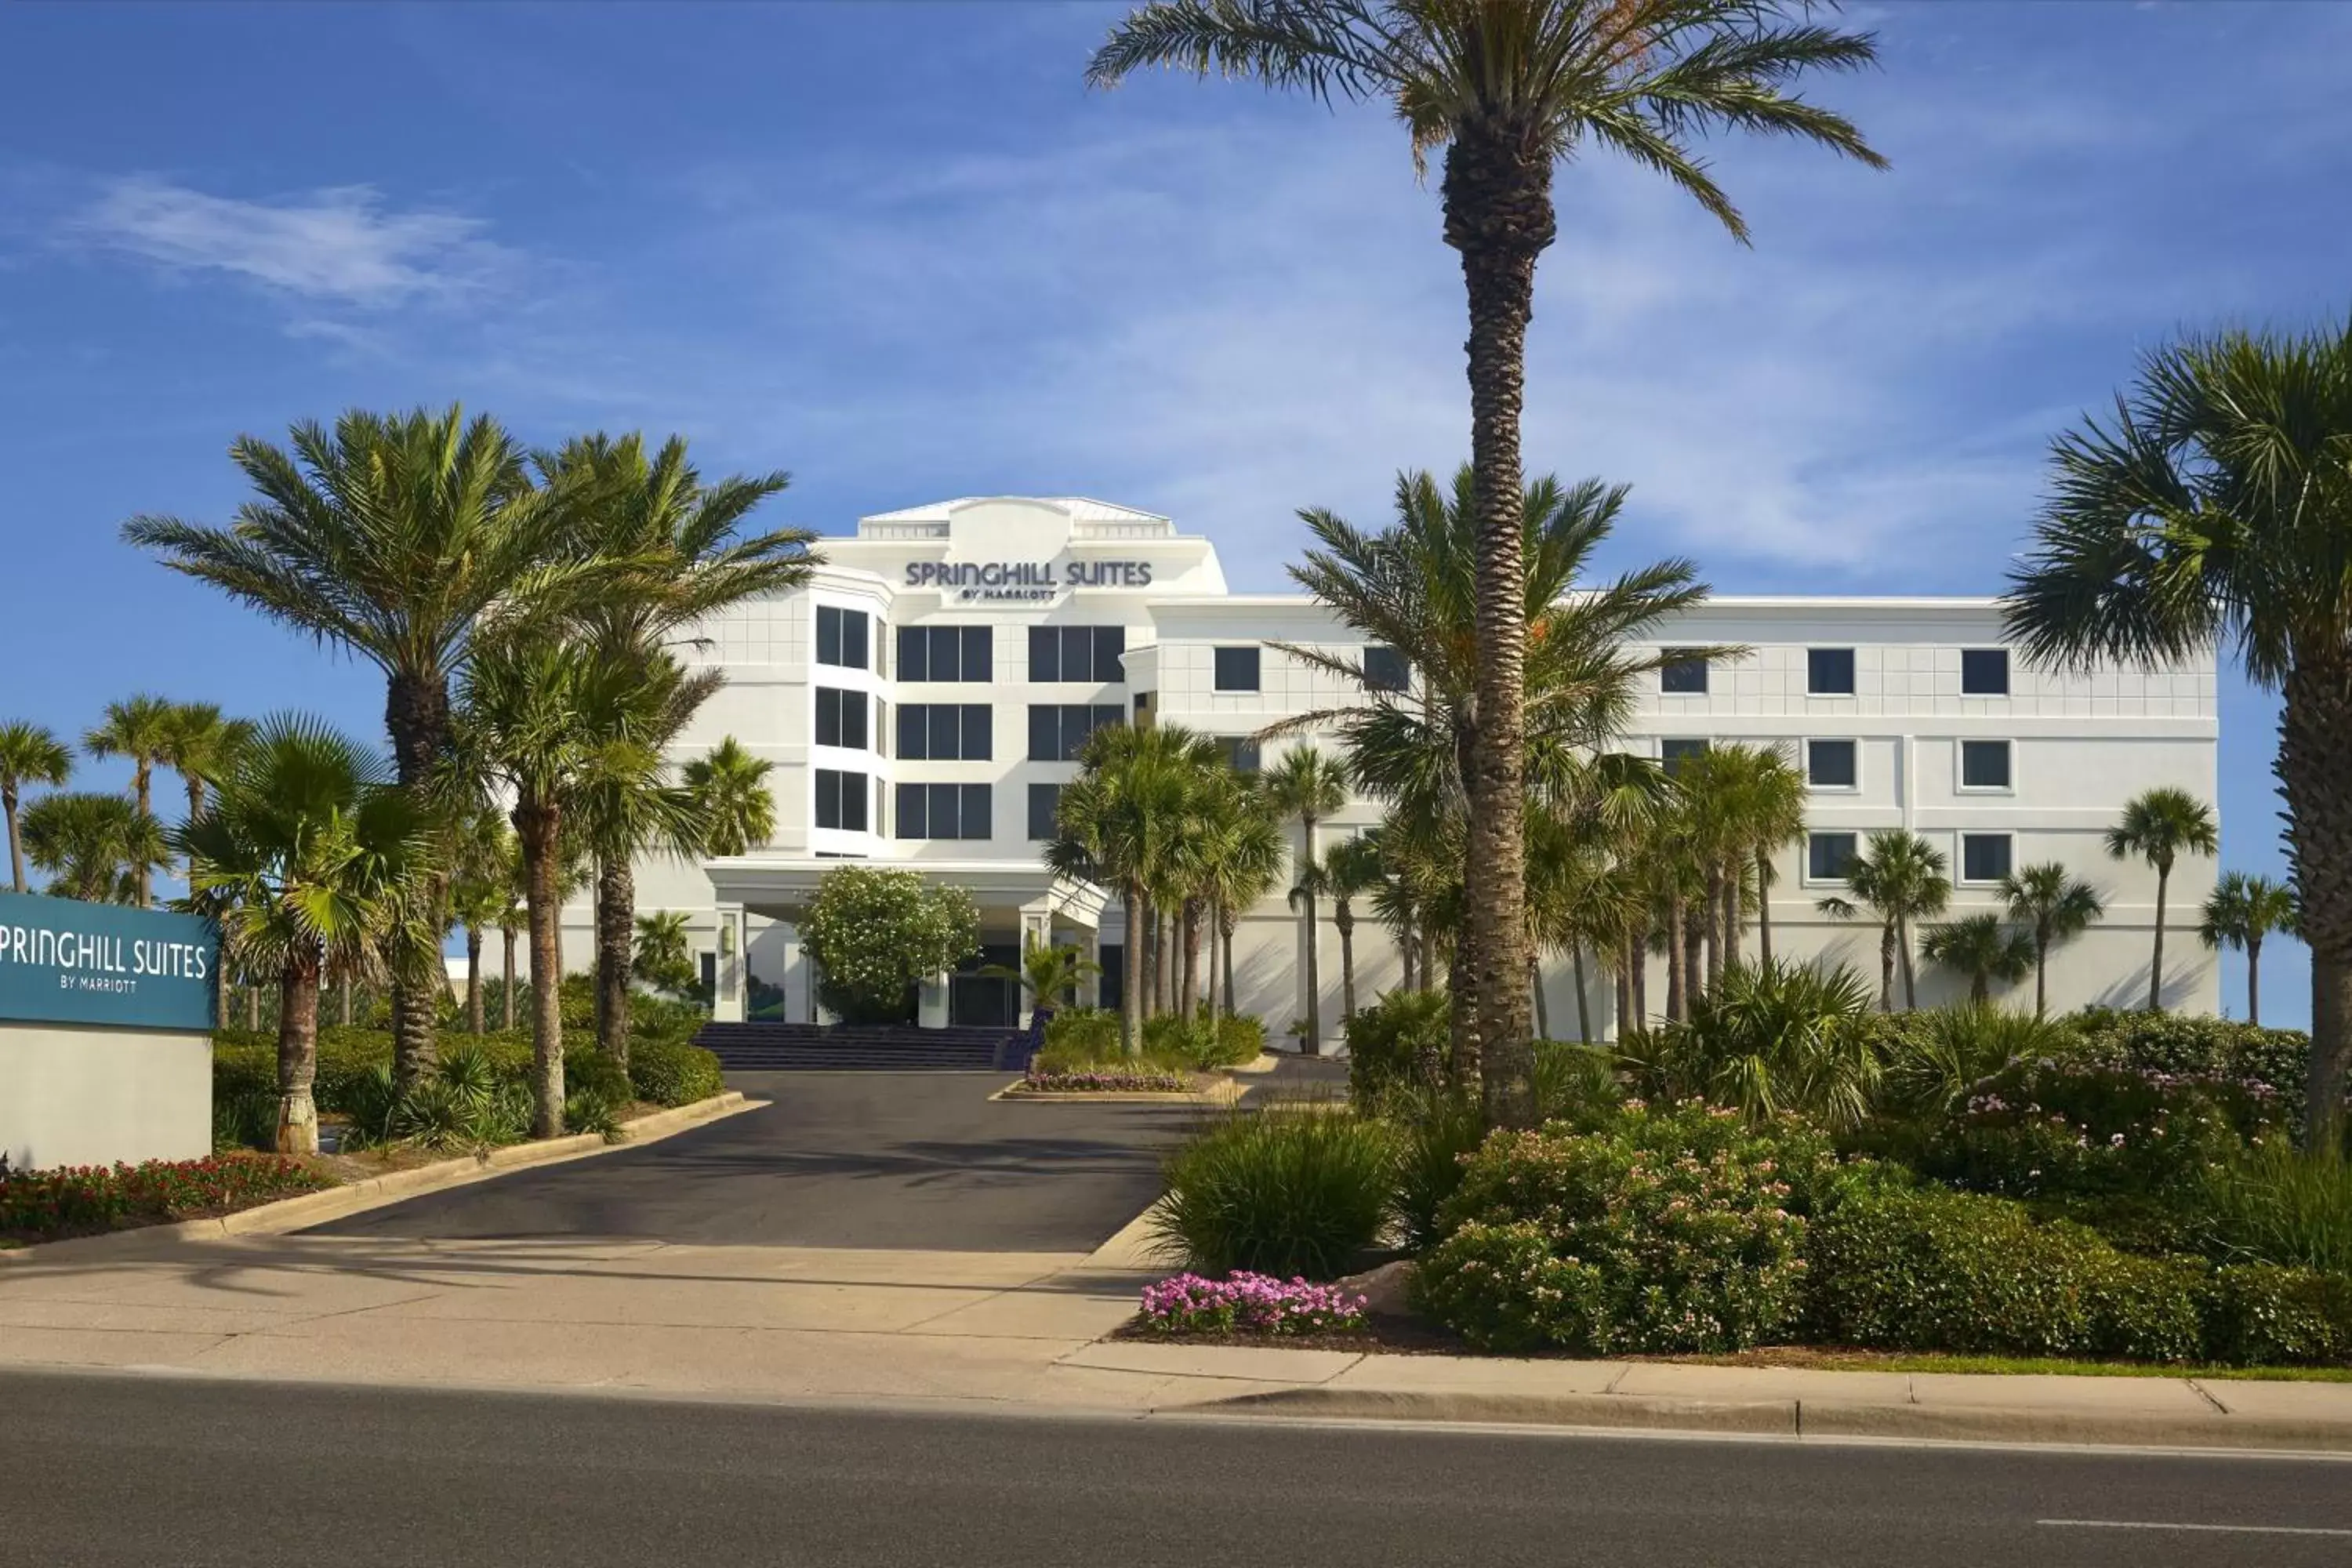 Property Building in SpringHill Suites by Marriott Pensacola Beach